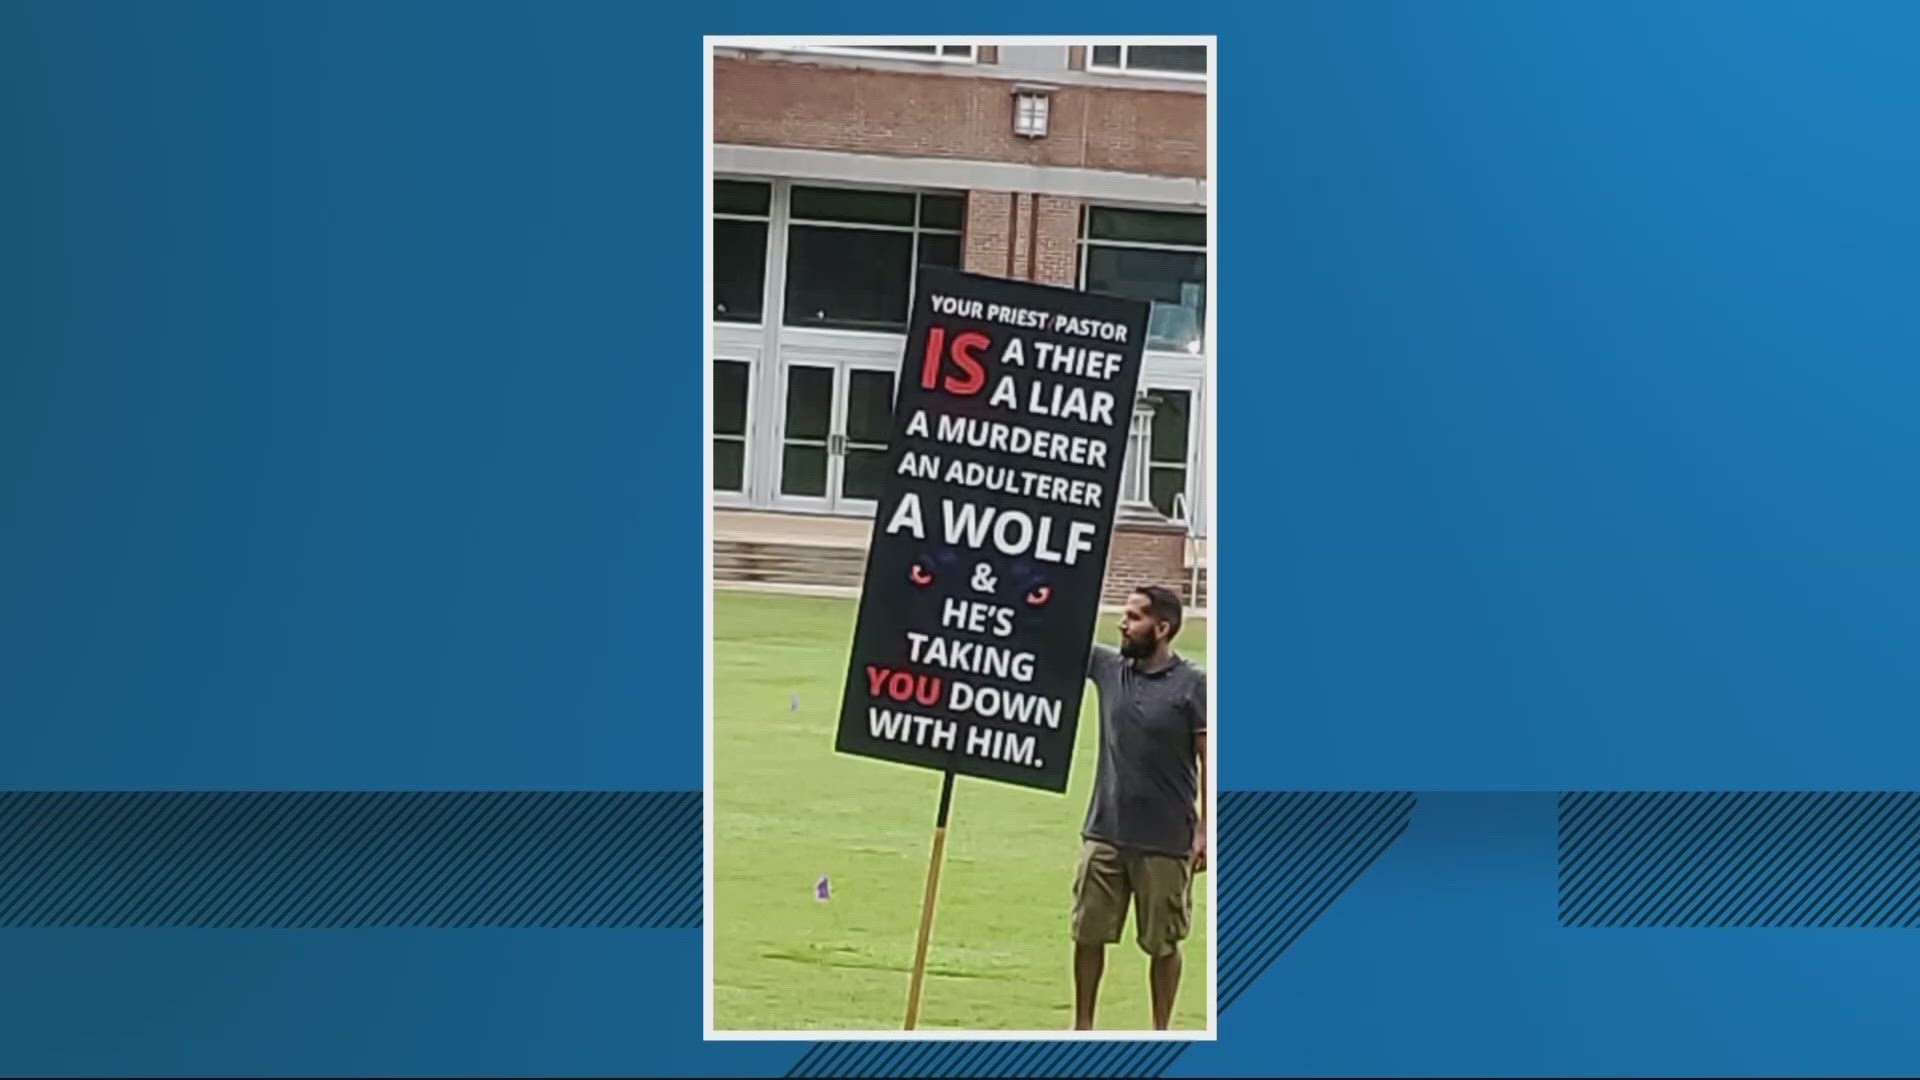 Students formed their own organization to combat the hate